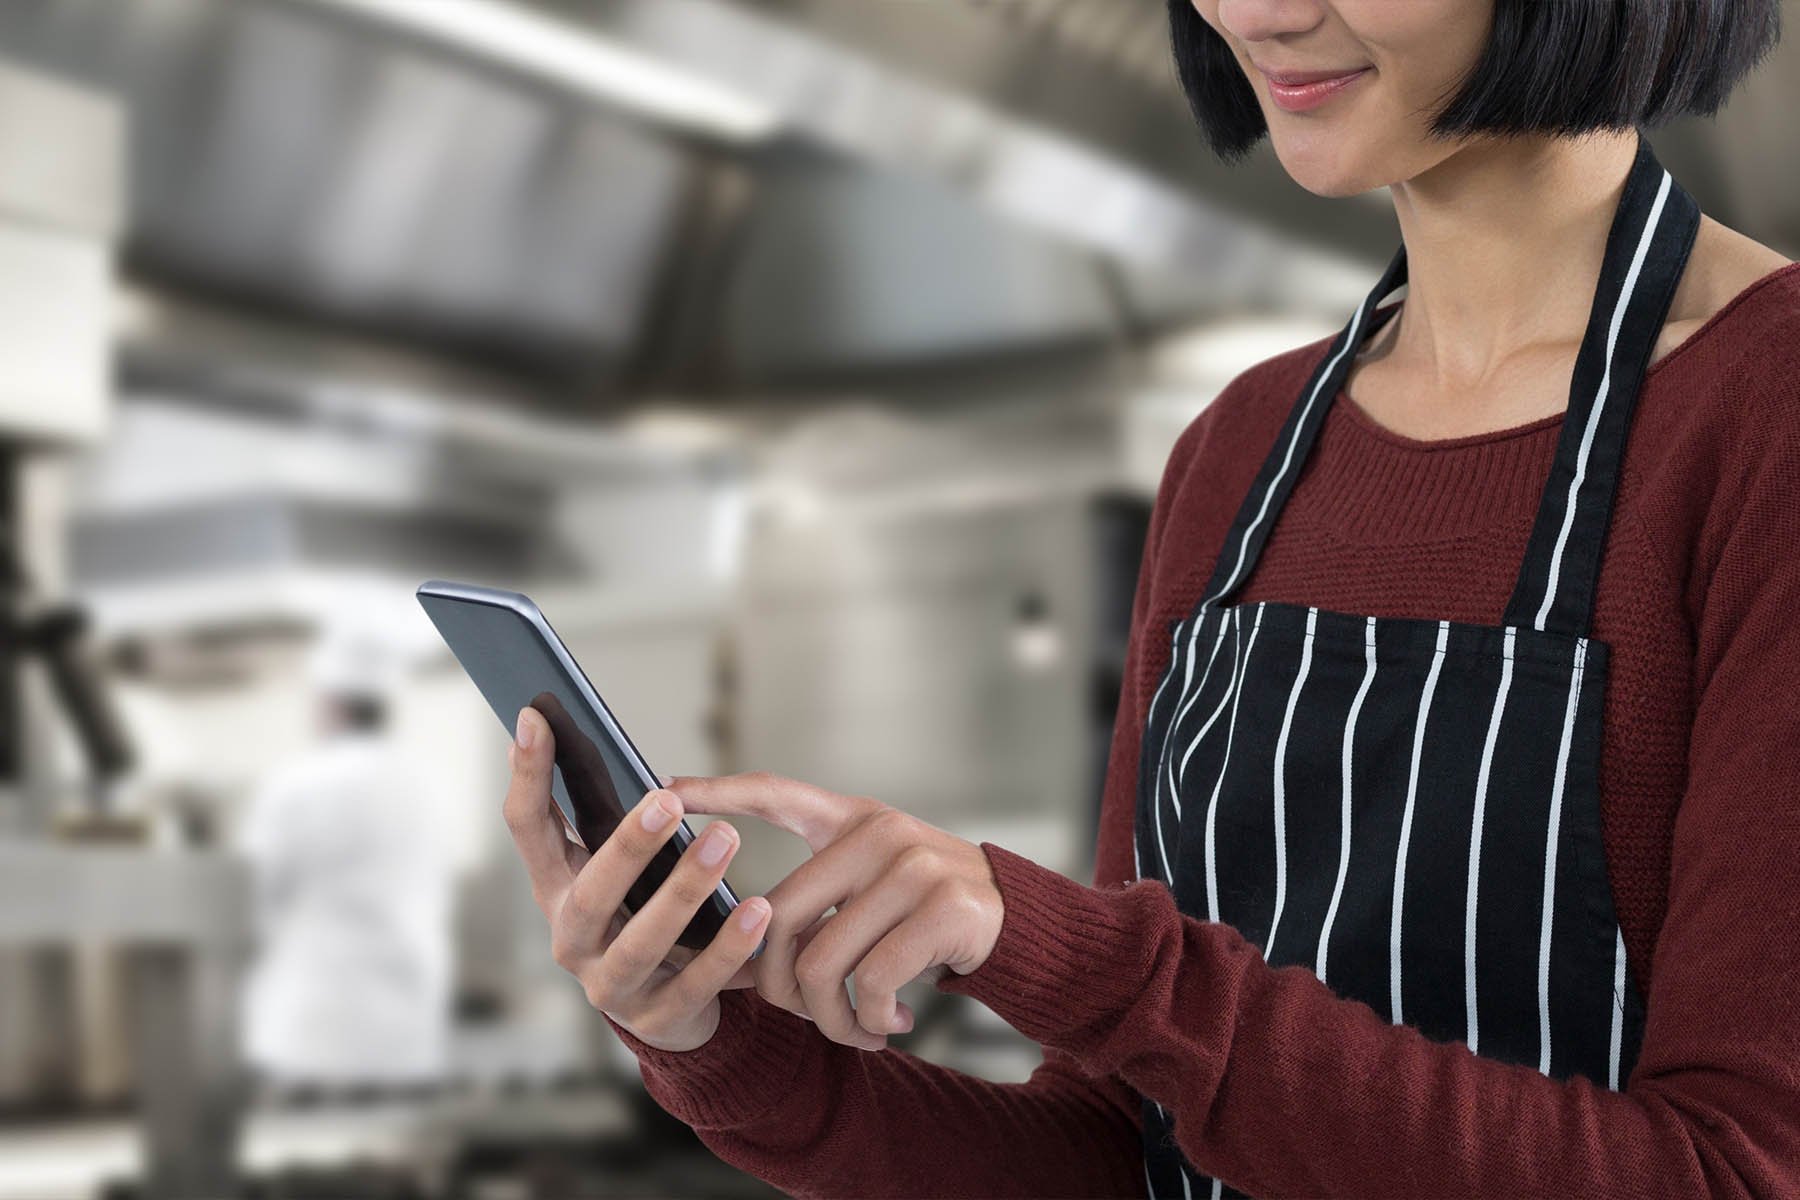 waitress in an apron typing on her cell phone with a restaurant kitchen background